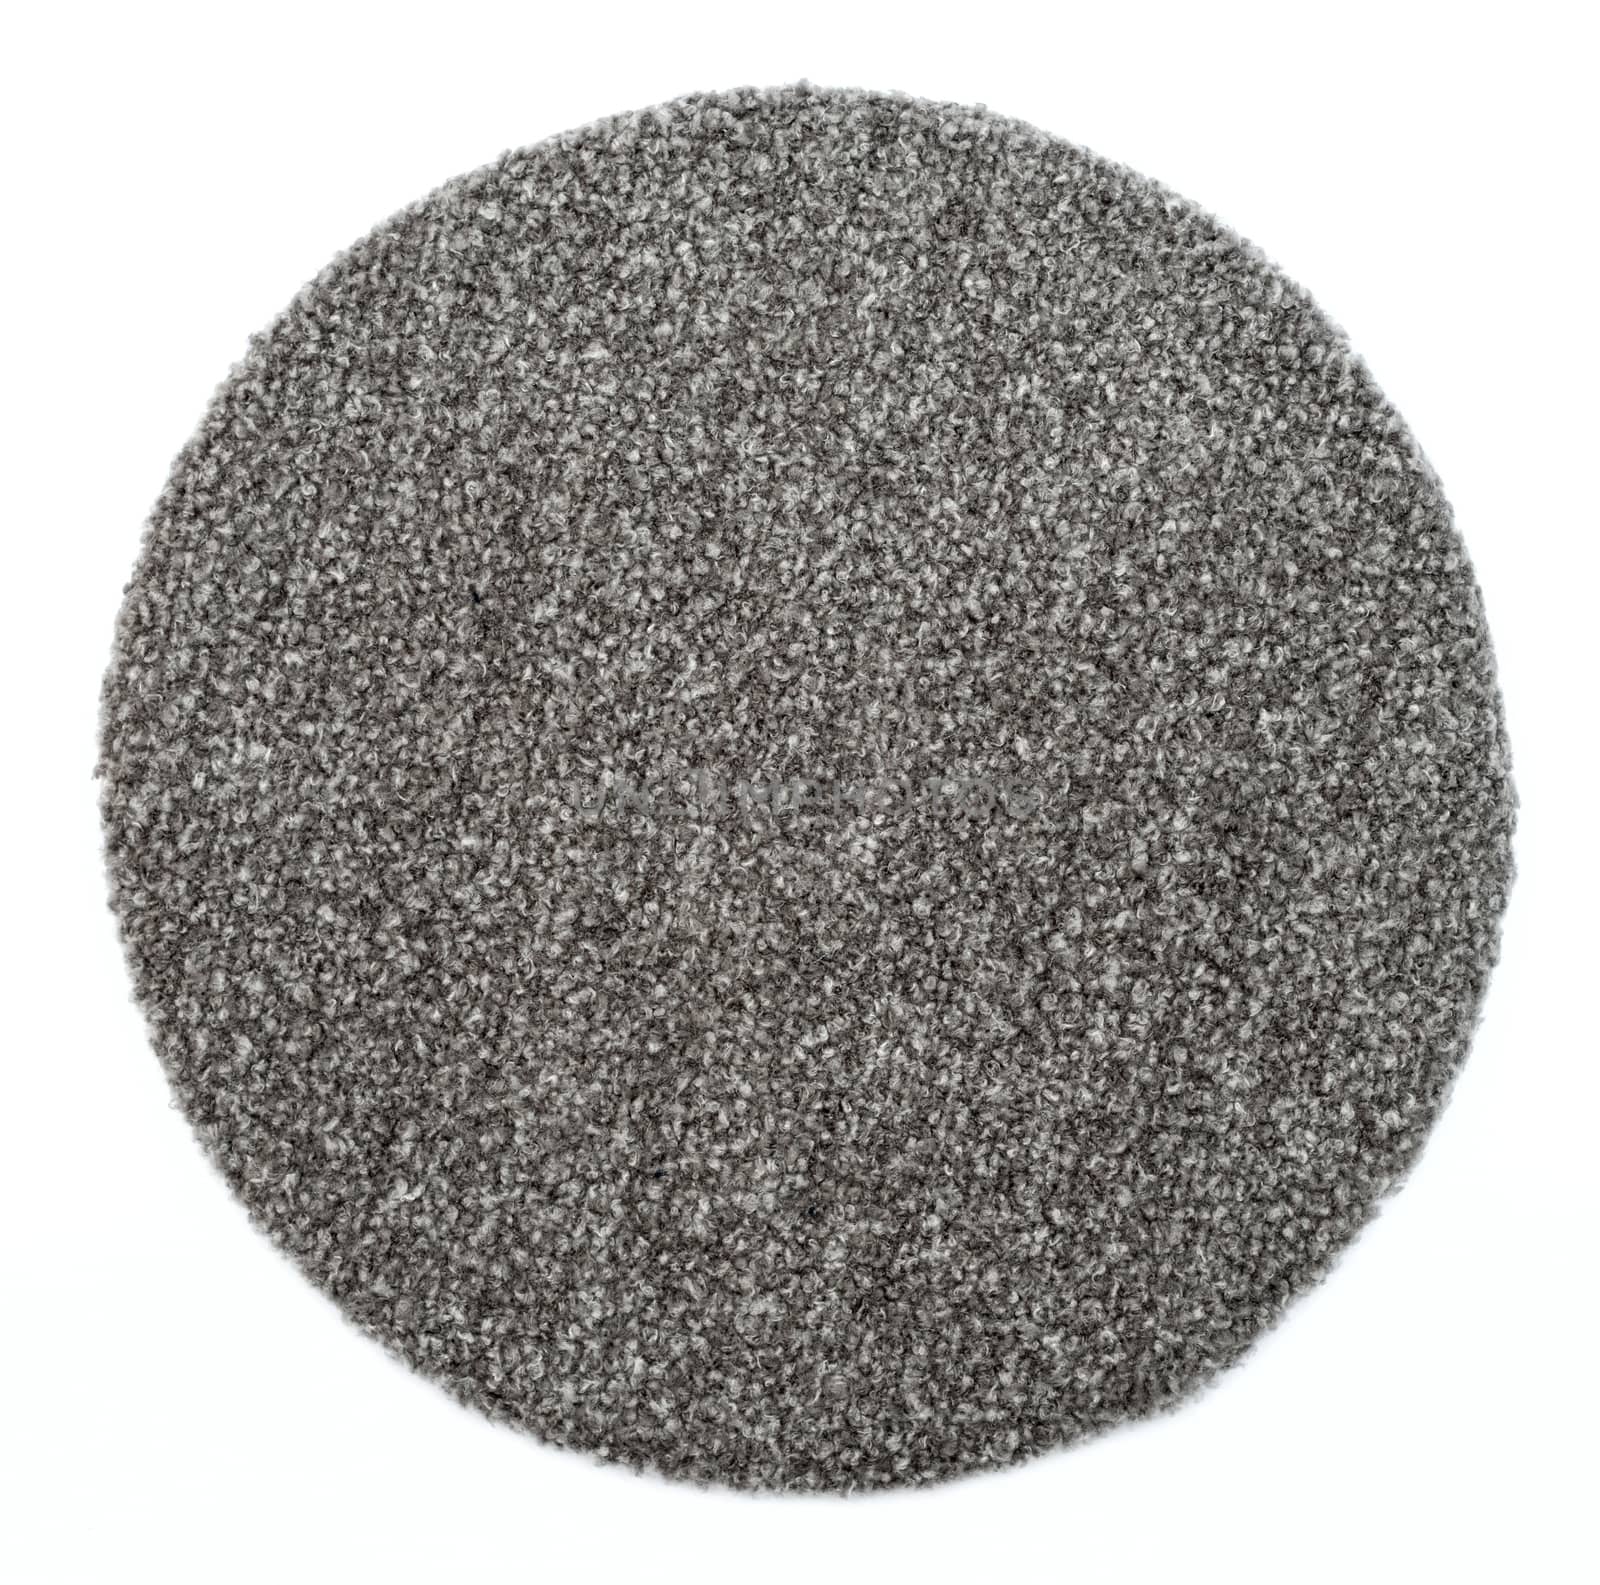 a round grey carpet isolated on white background by DNKSTUDIO